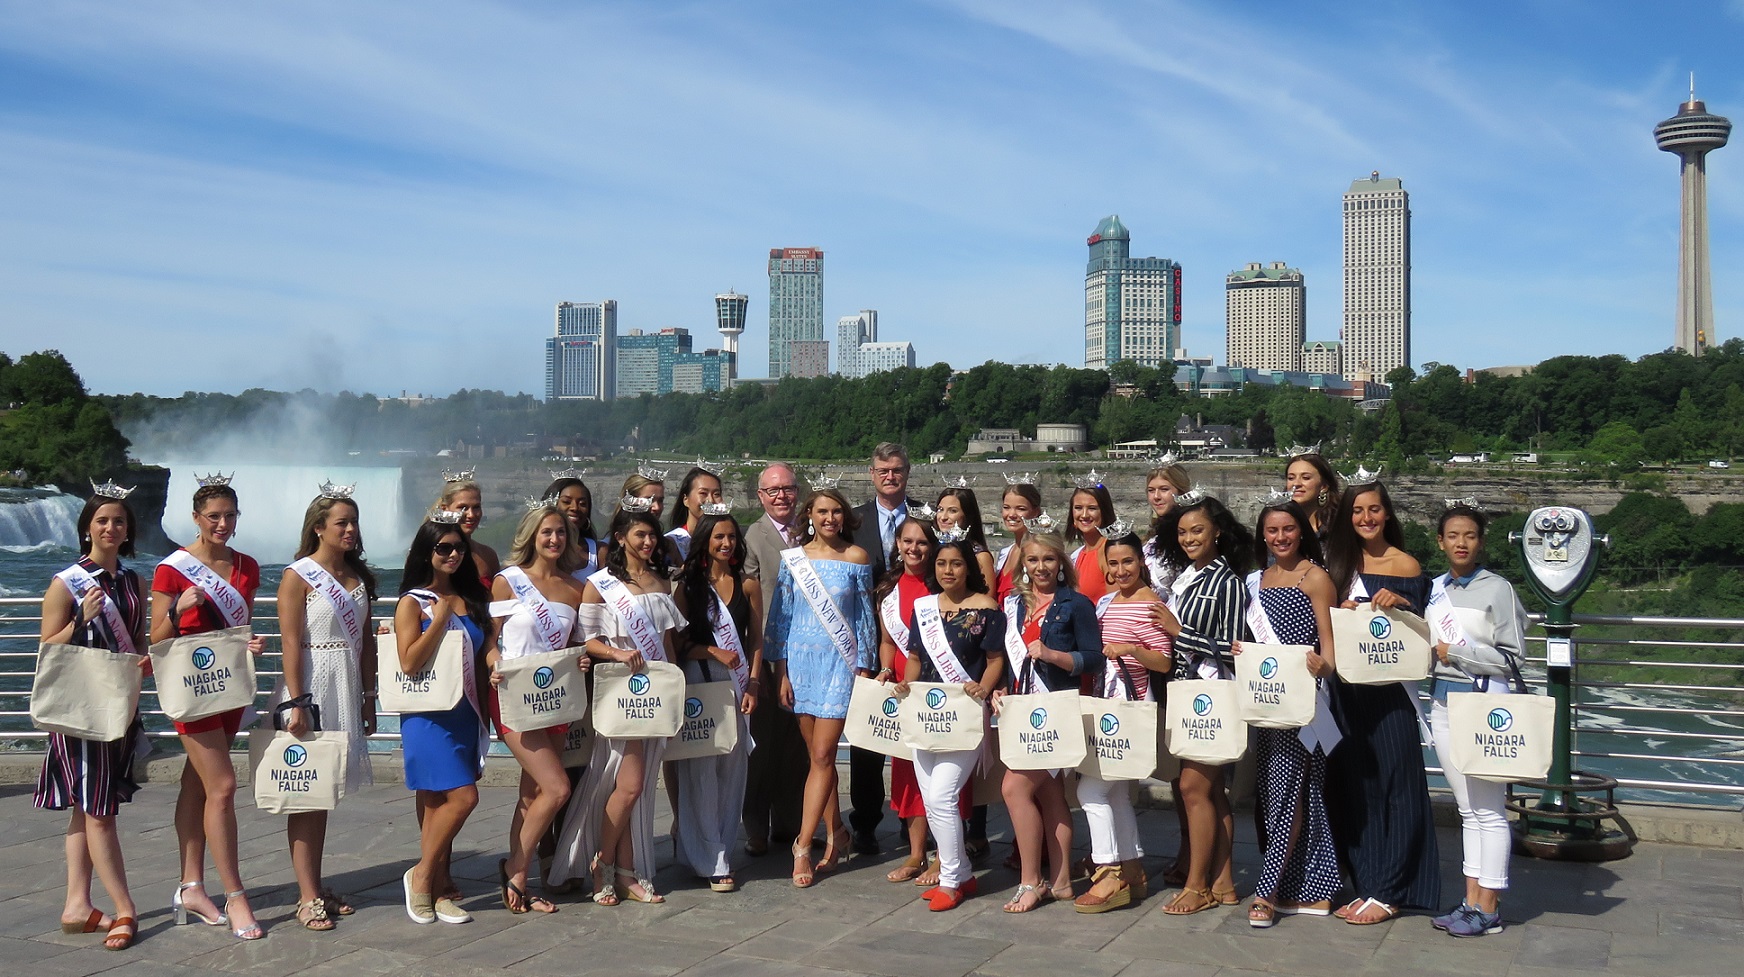 Contestants for the 2018 Miss New York pageant pose for a photo at Niagara Falls with current Miss New York Gabrielle Walter, Niagara Falls Mayor Paul Dyster and Destination Niagara USA President and CEO John Percy. (All photos by David Yarger) 